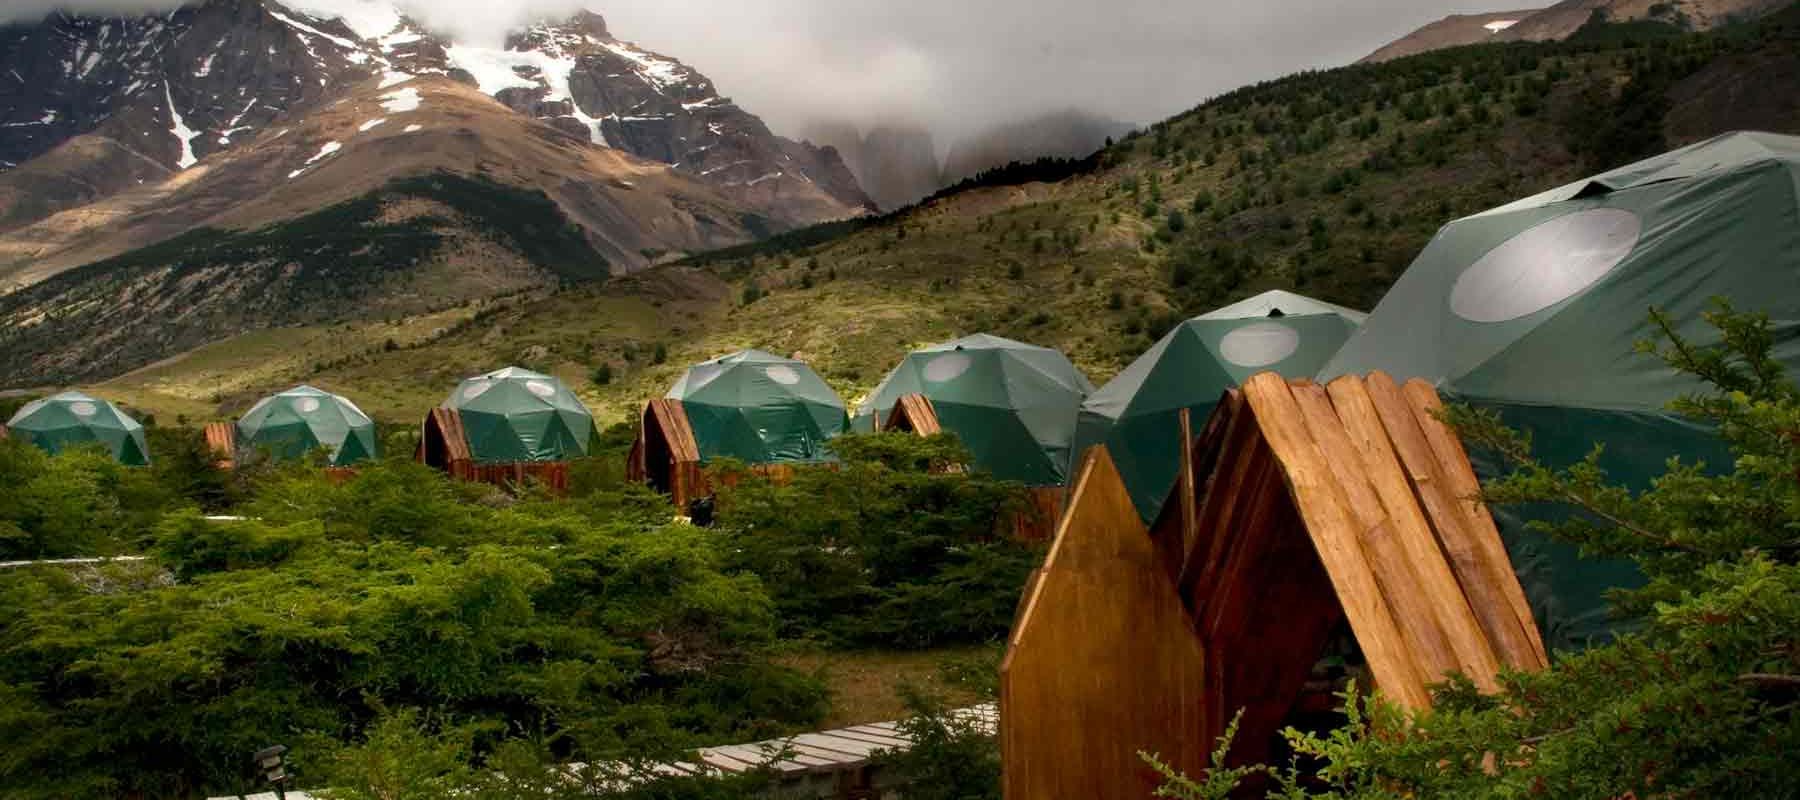 Typical Outdoor Accommodation EcoCamp Patagonia Chile